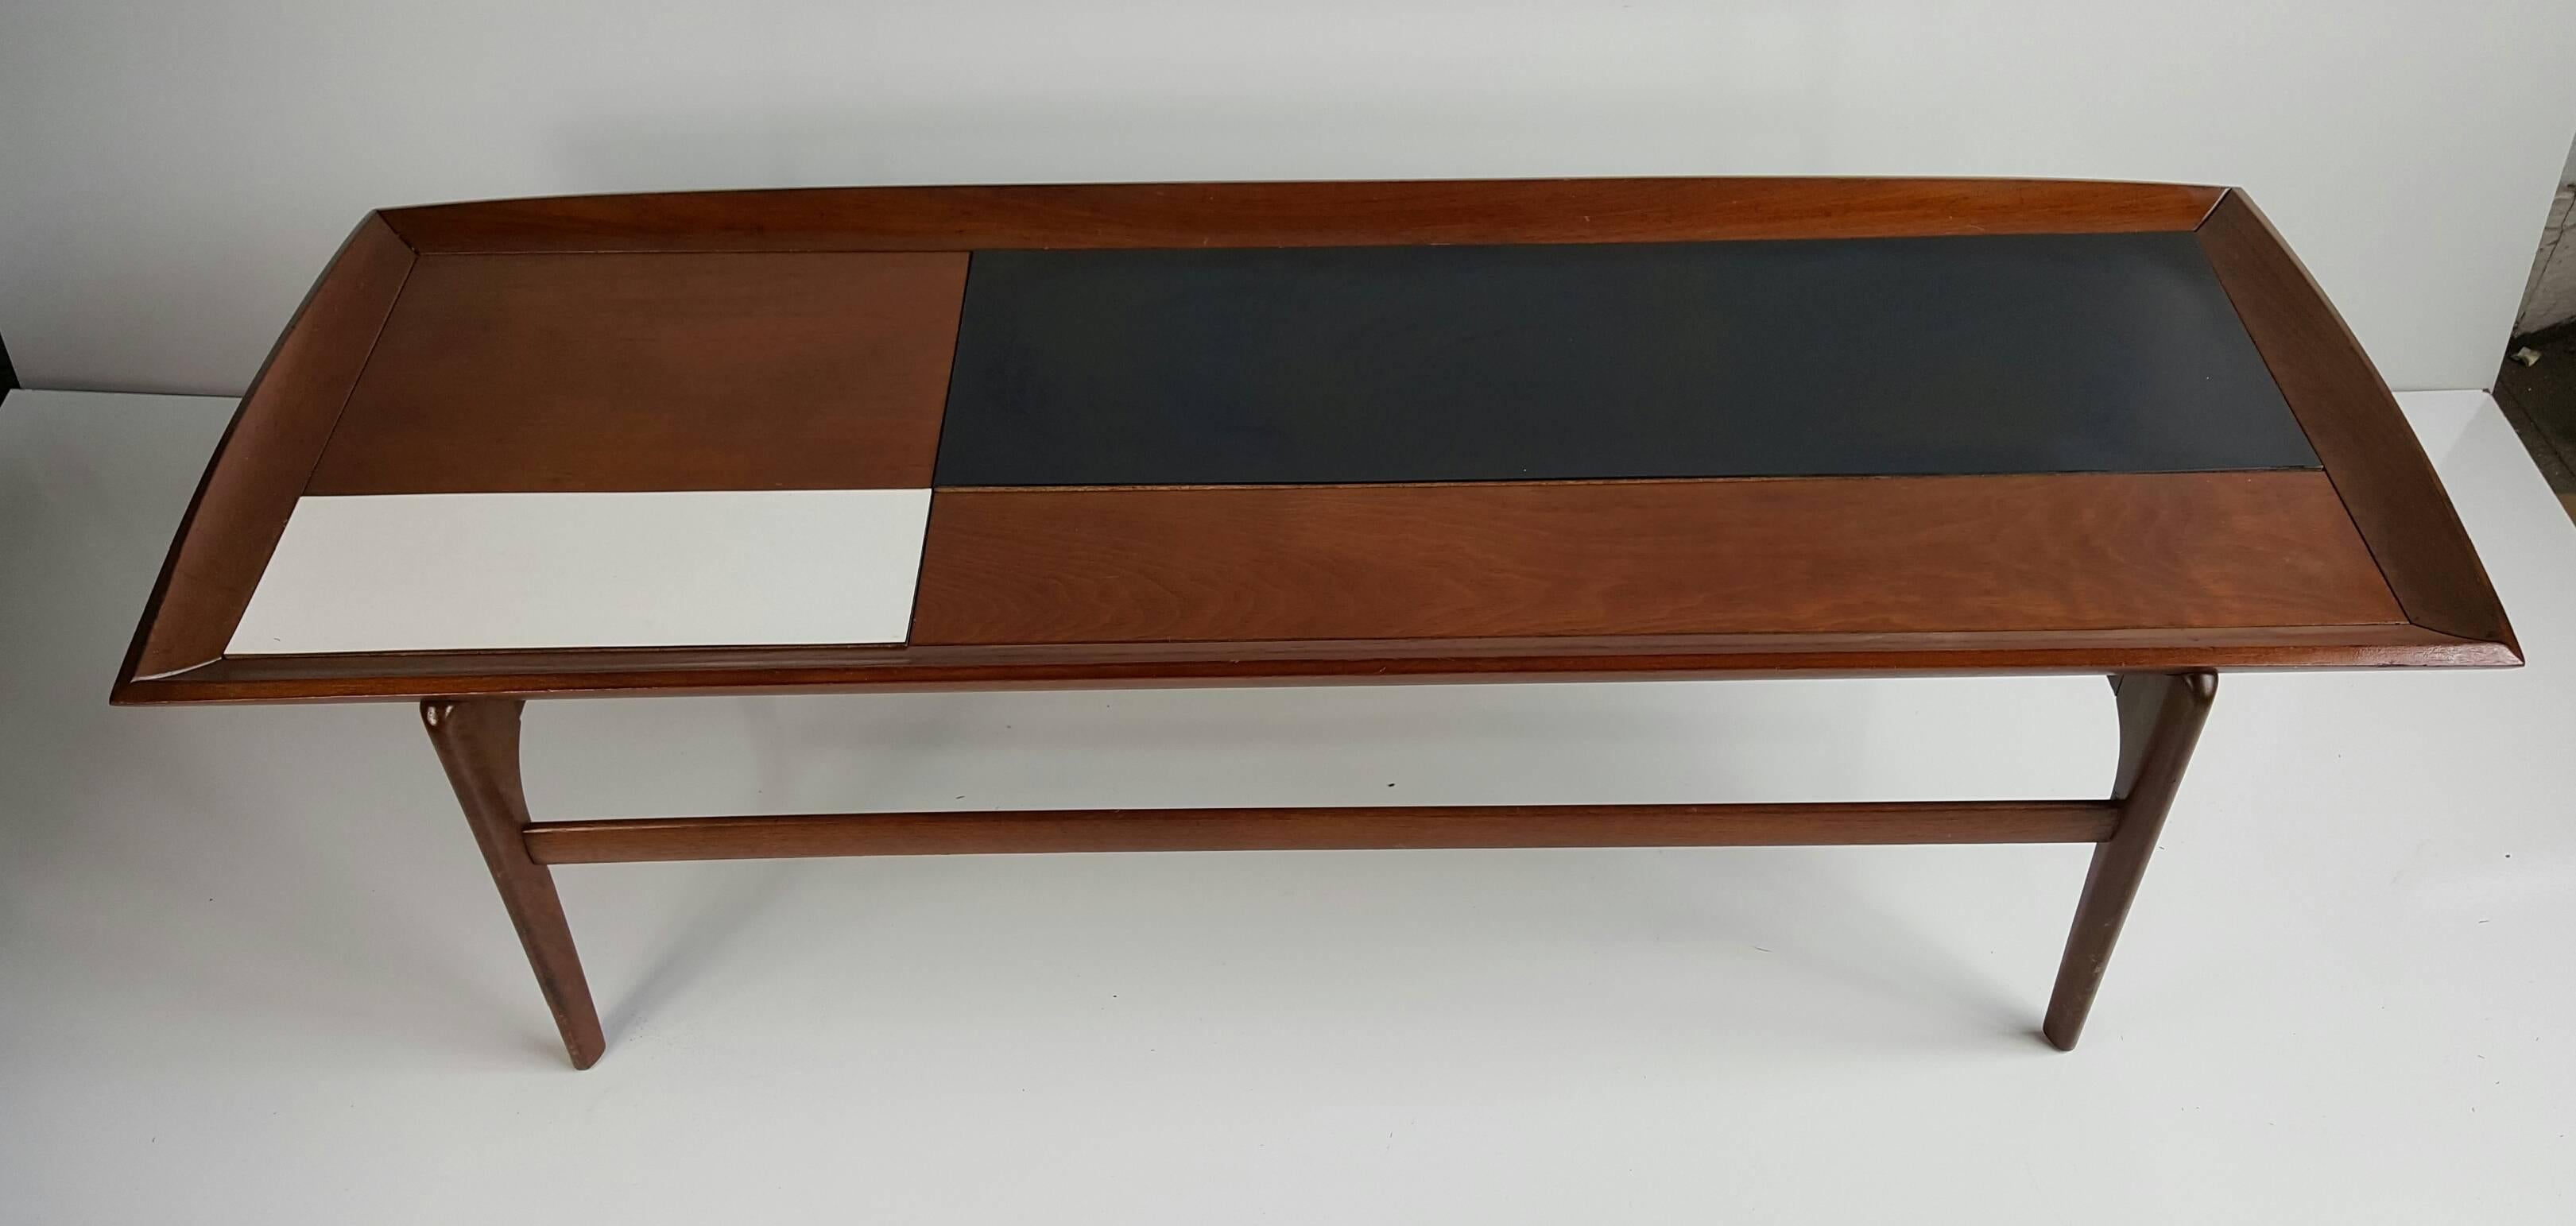 Handsome Mid-Century Modern coffee/cocktail table. Solid walnut top interesting black and white laminate inserts, raised edge.